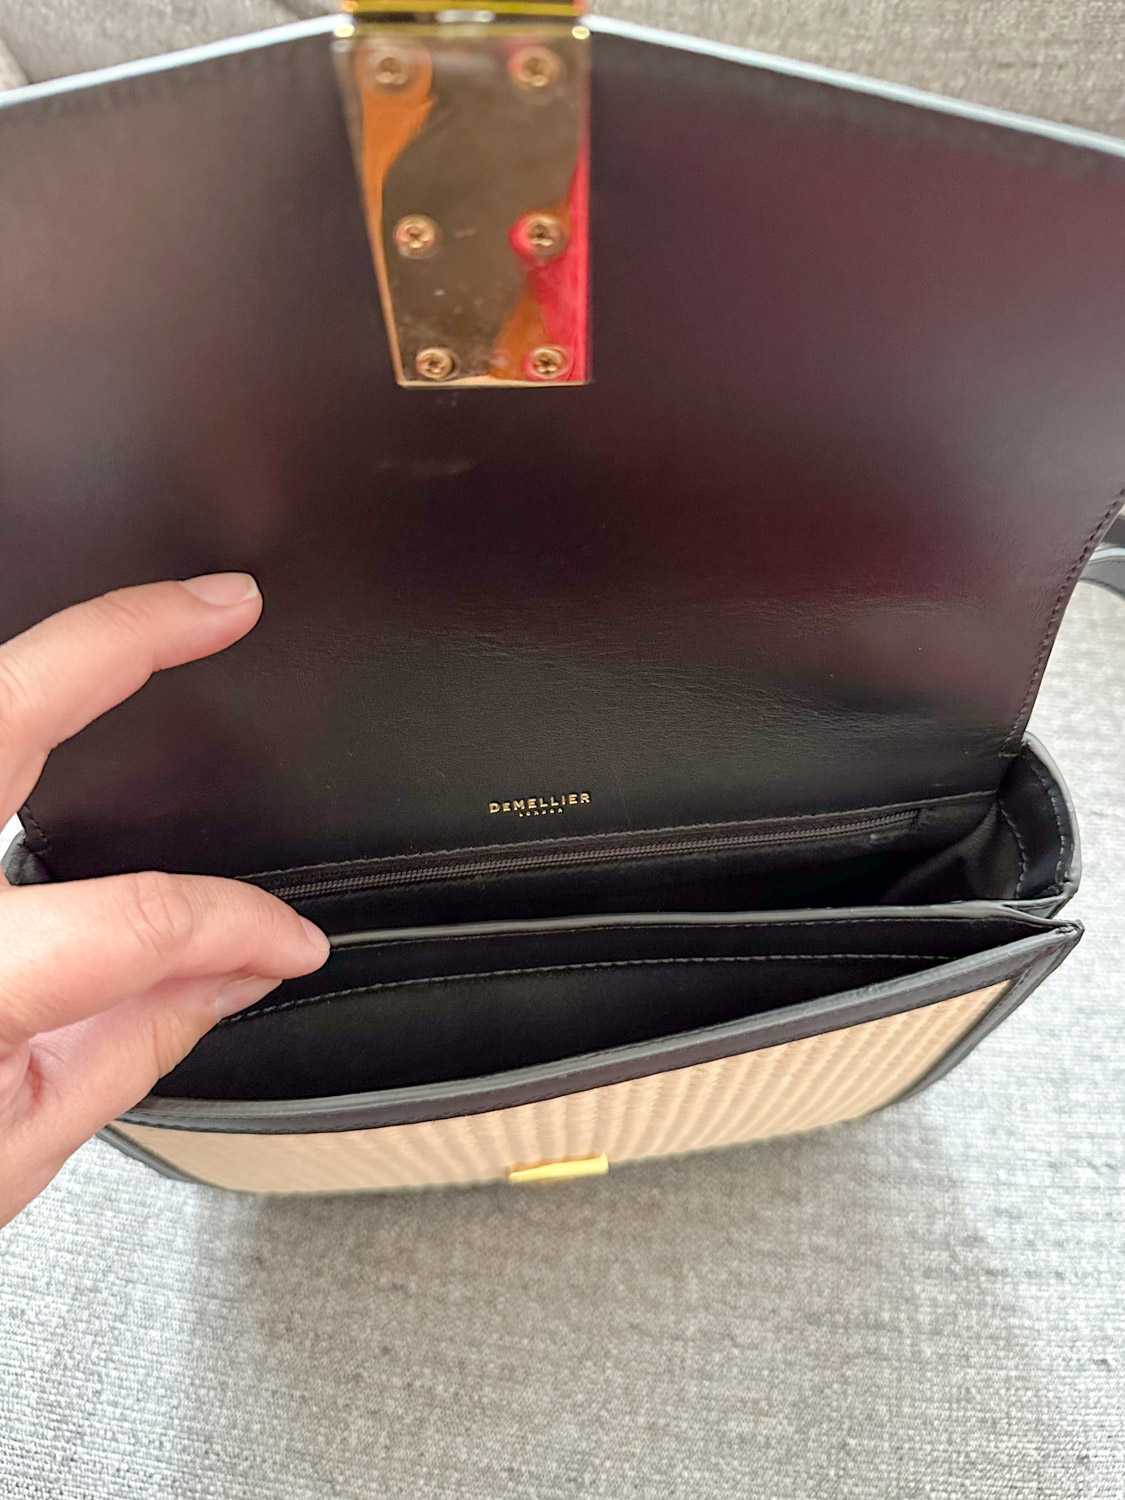 demellier vancouver bag review